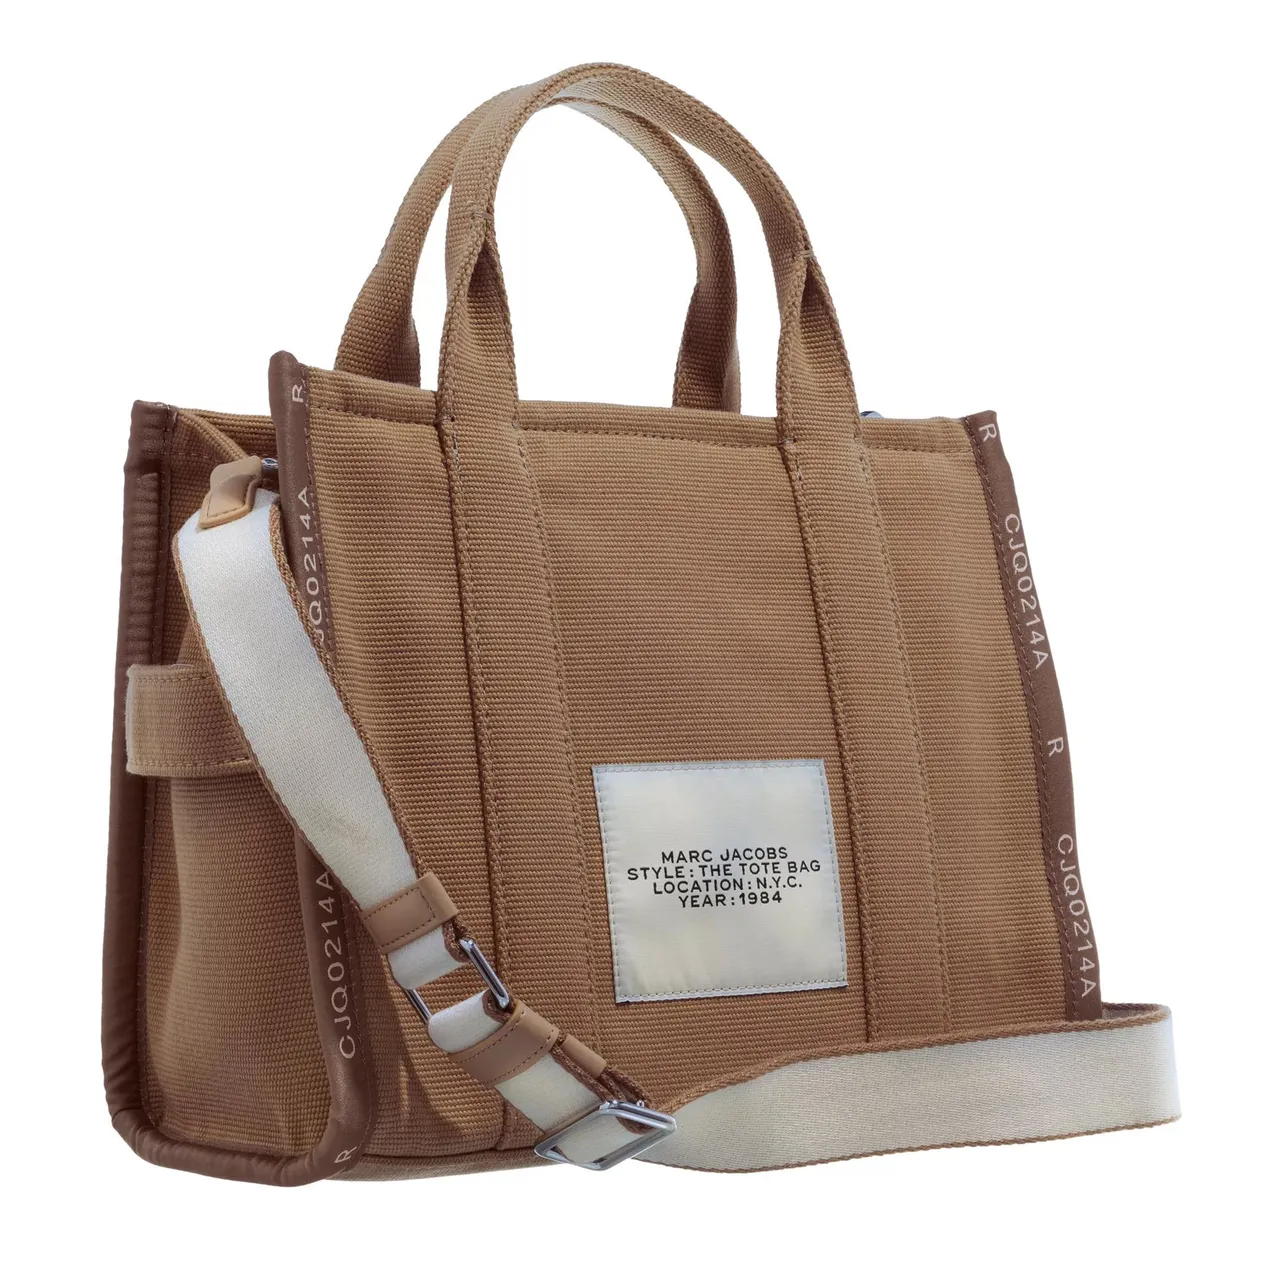 Marc Jacobs Tote Bags - The Medium Tote - beige - Tote Bags for ladies